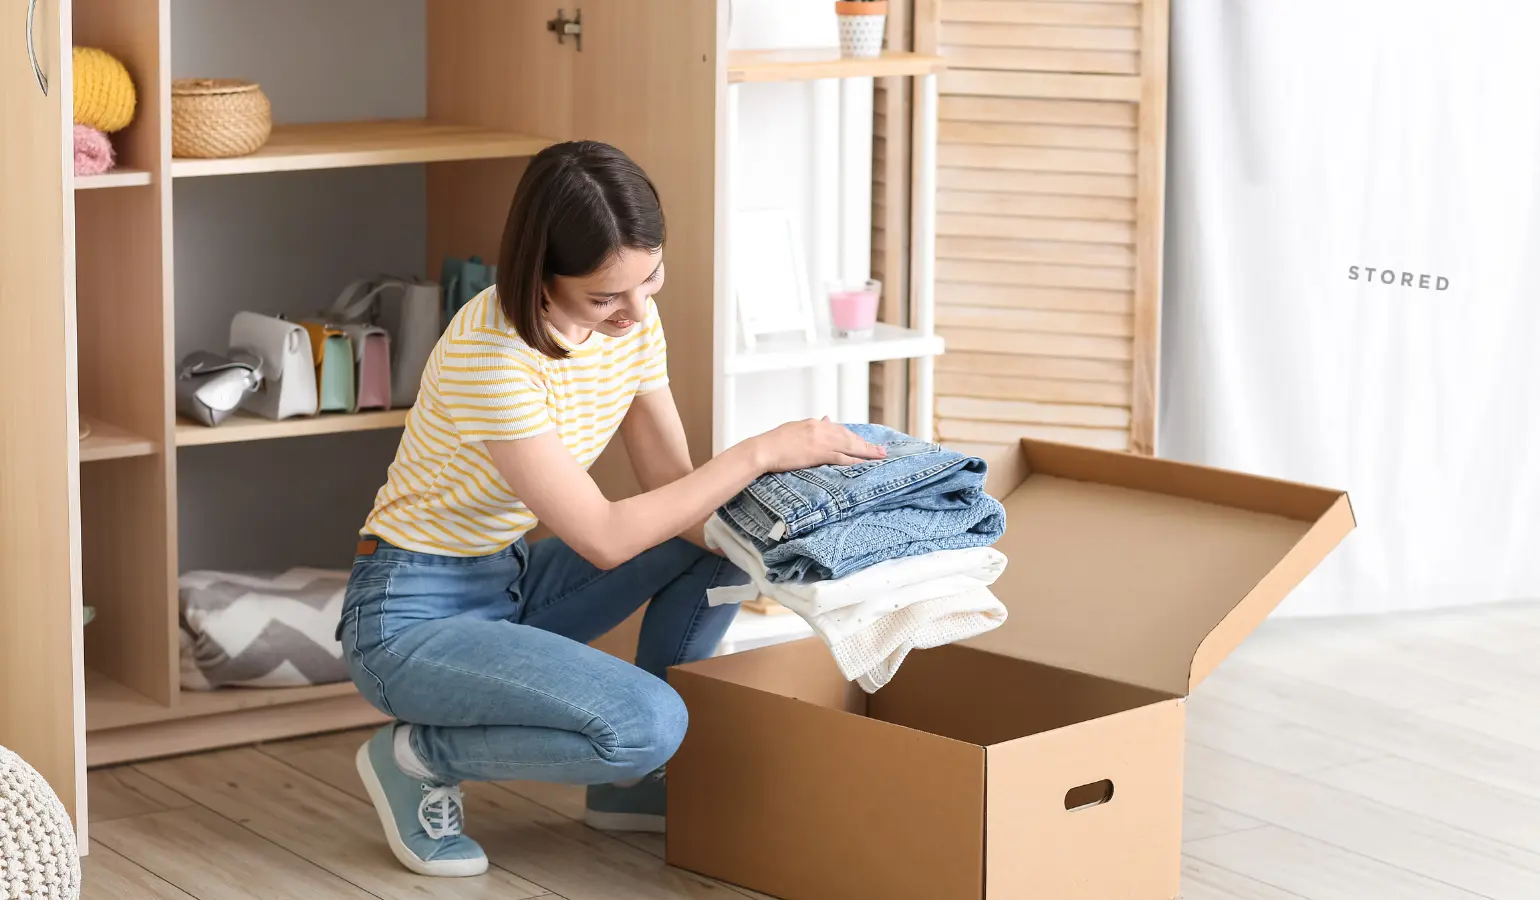 Will Clothes Get Ruined Inside A Storage Unit?